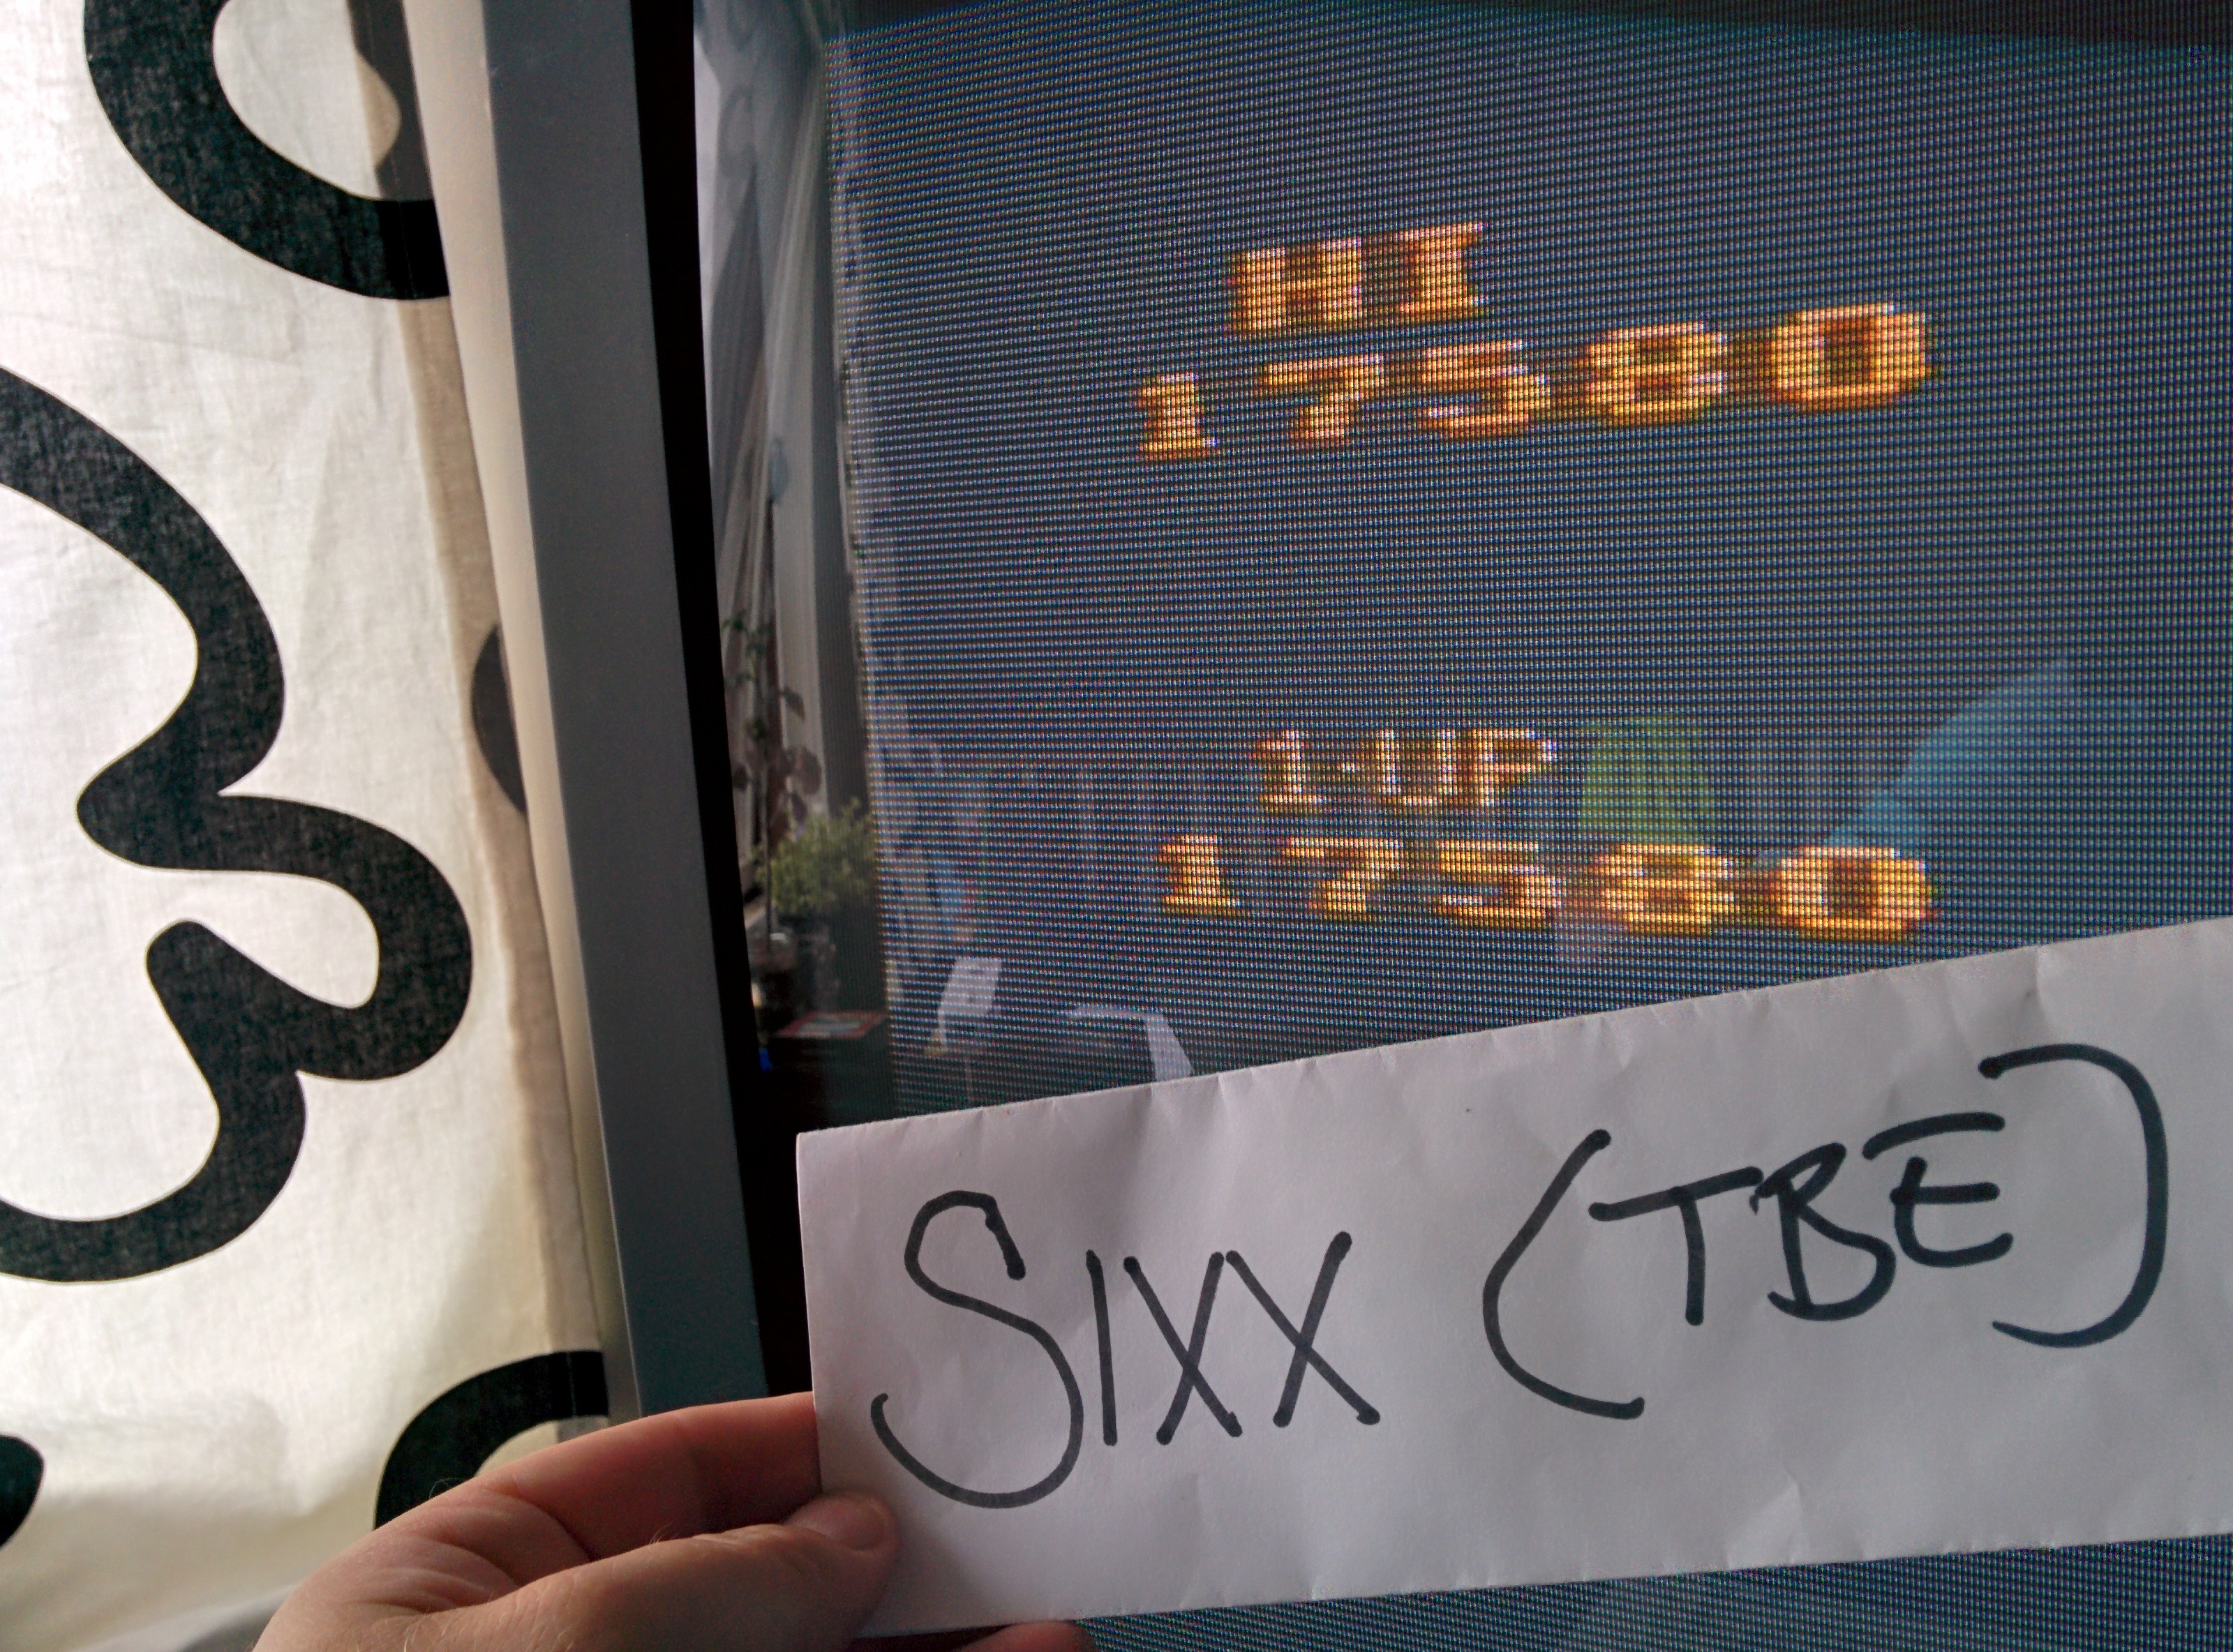 Sixx: Frogger, The Official (Atari 2600 Emulated Novice/B Mode) 17,580 points on 2014-07-31 05:01:21